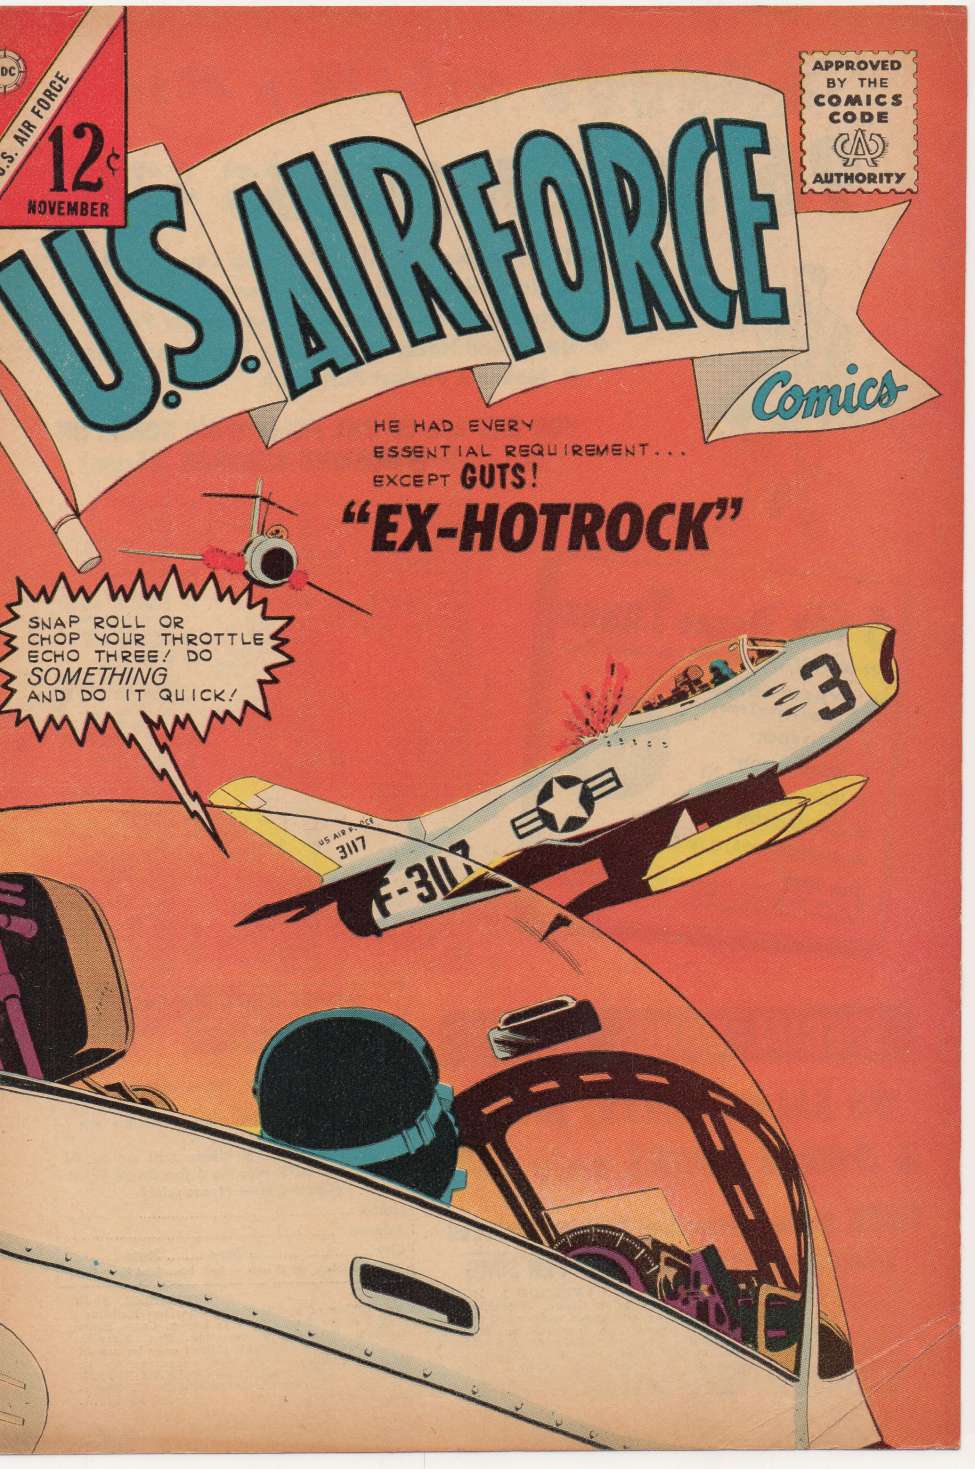 Book Cover For U.S. Air Force Comics 30